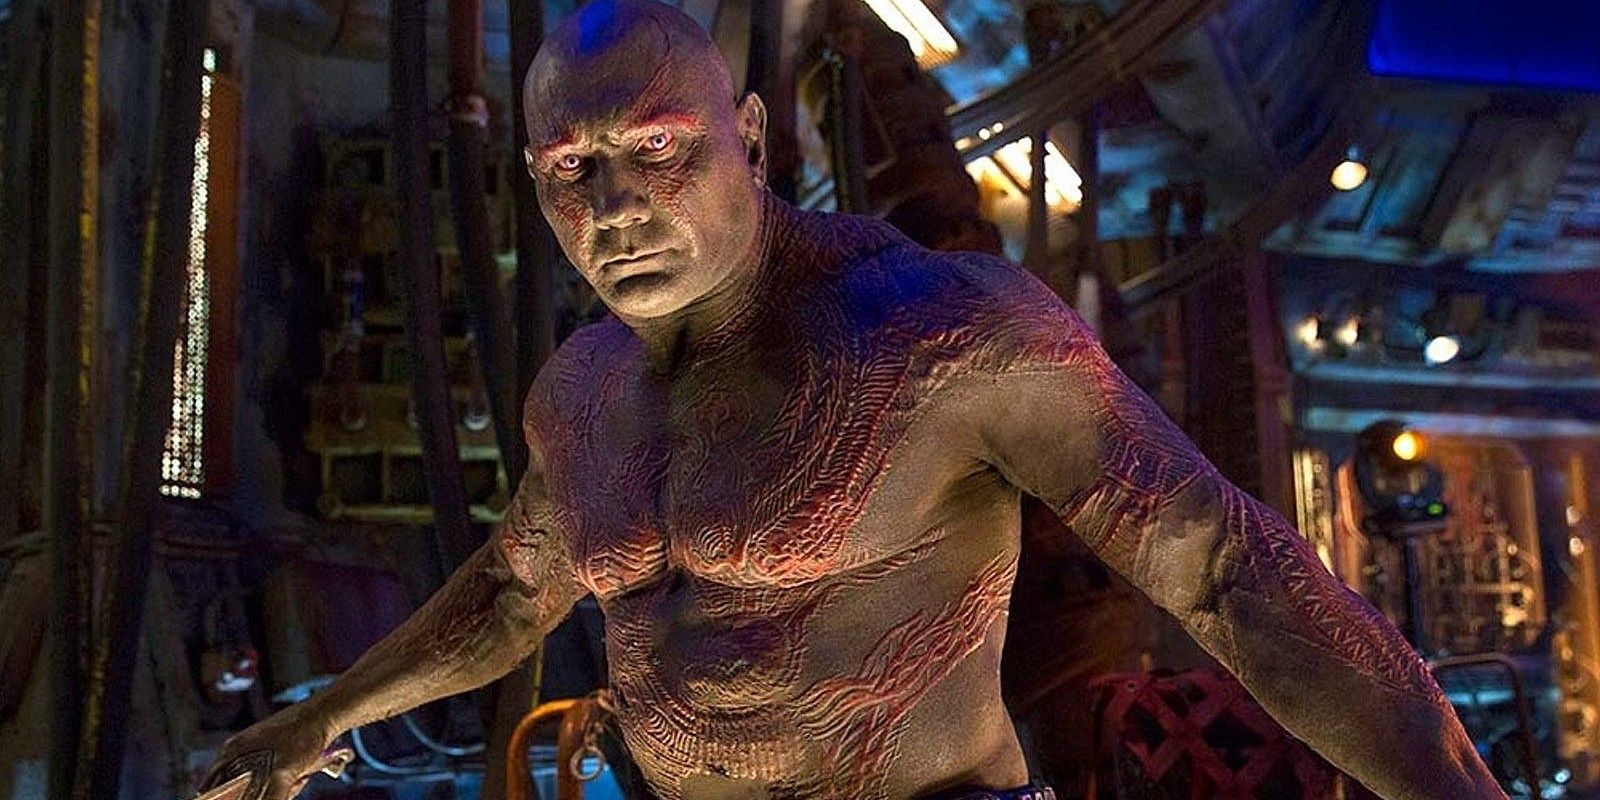 Drax posing to fight in Guardians of the Galaxy 